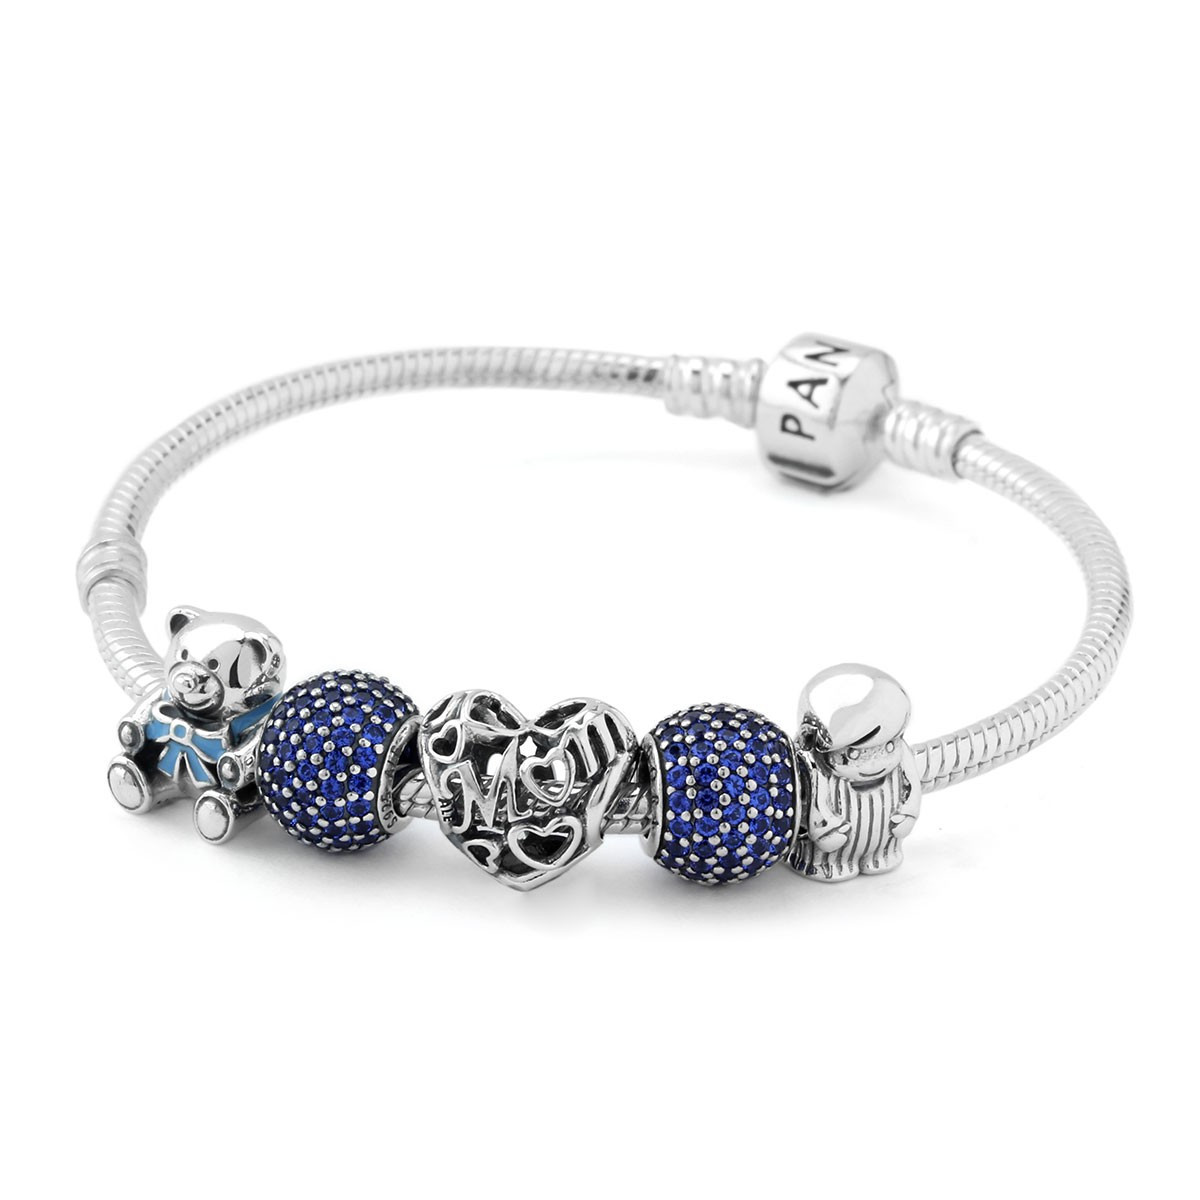 Pandora Bracelet Discount
 A Significant Discount For Pandora A Mother s Love from